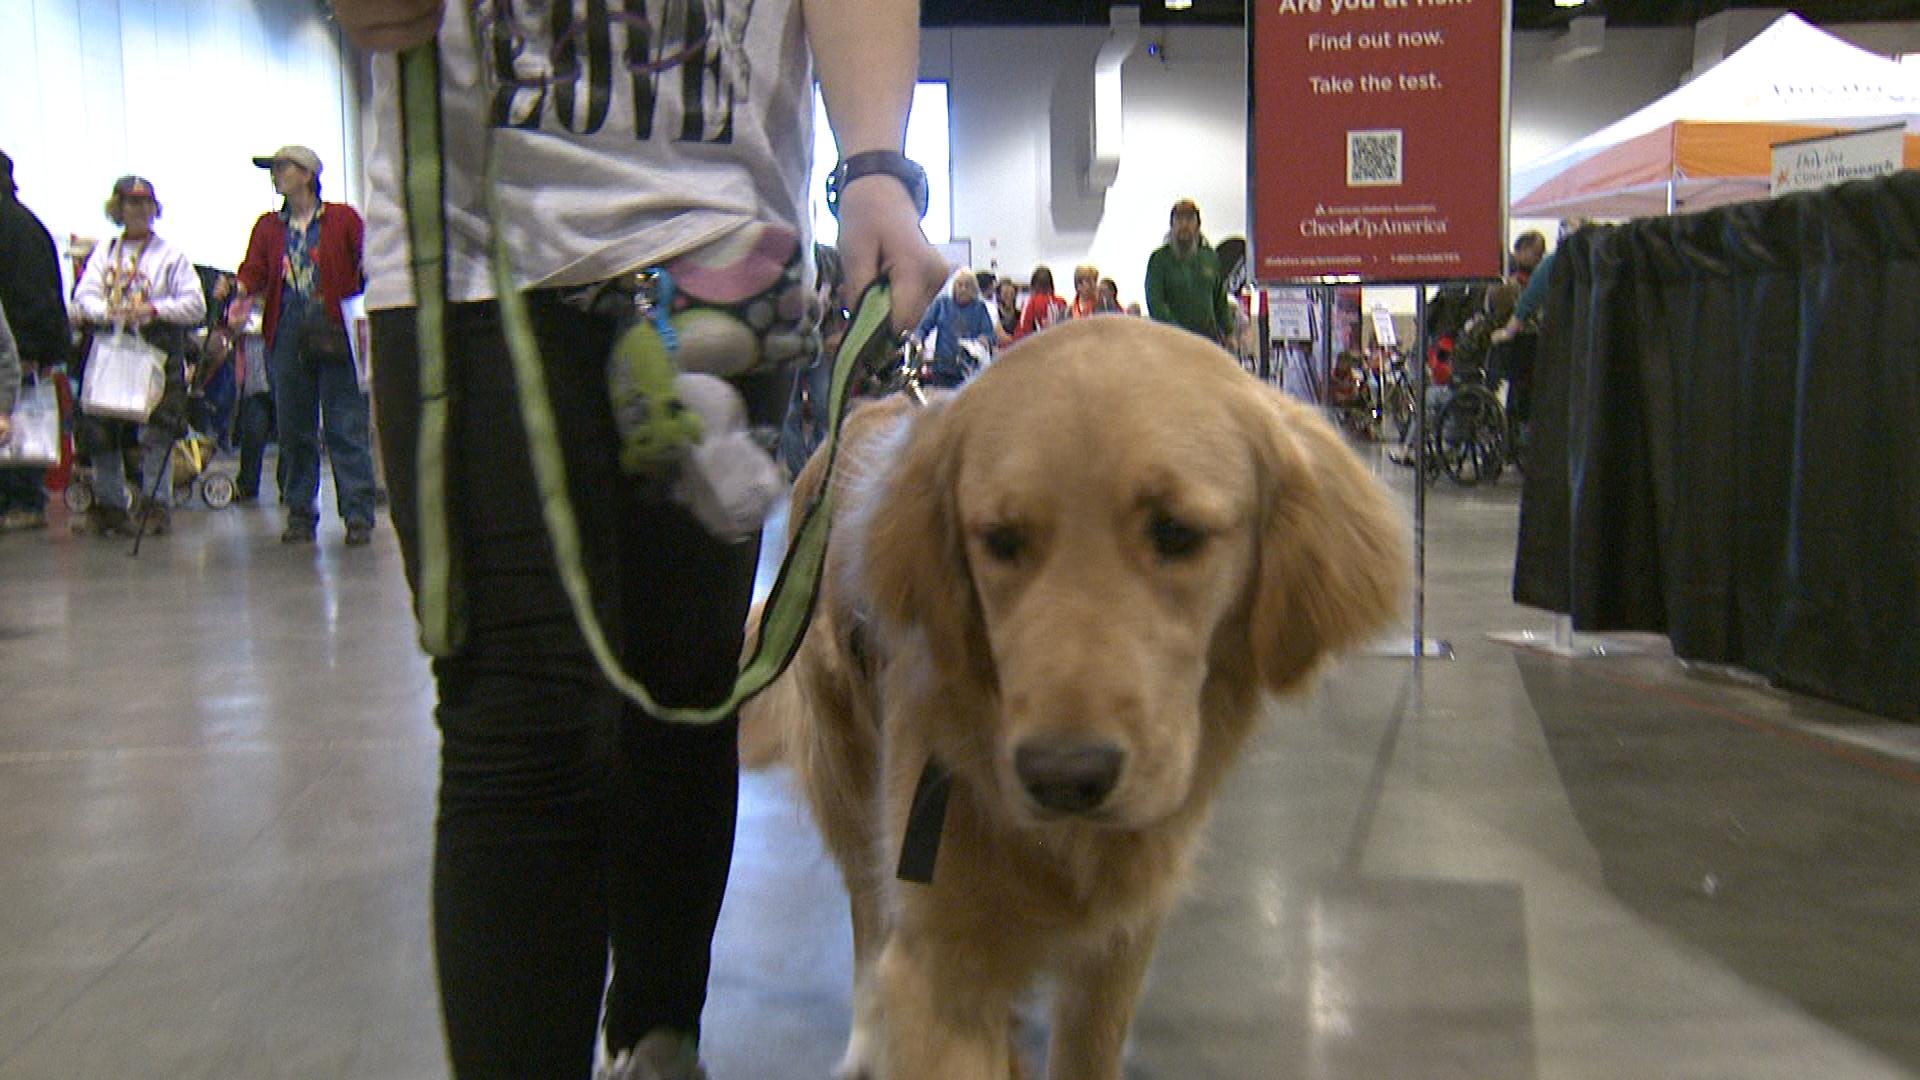 American Diabetes Association Expo Takes Place In Denver